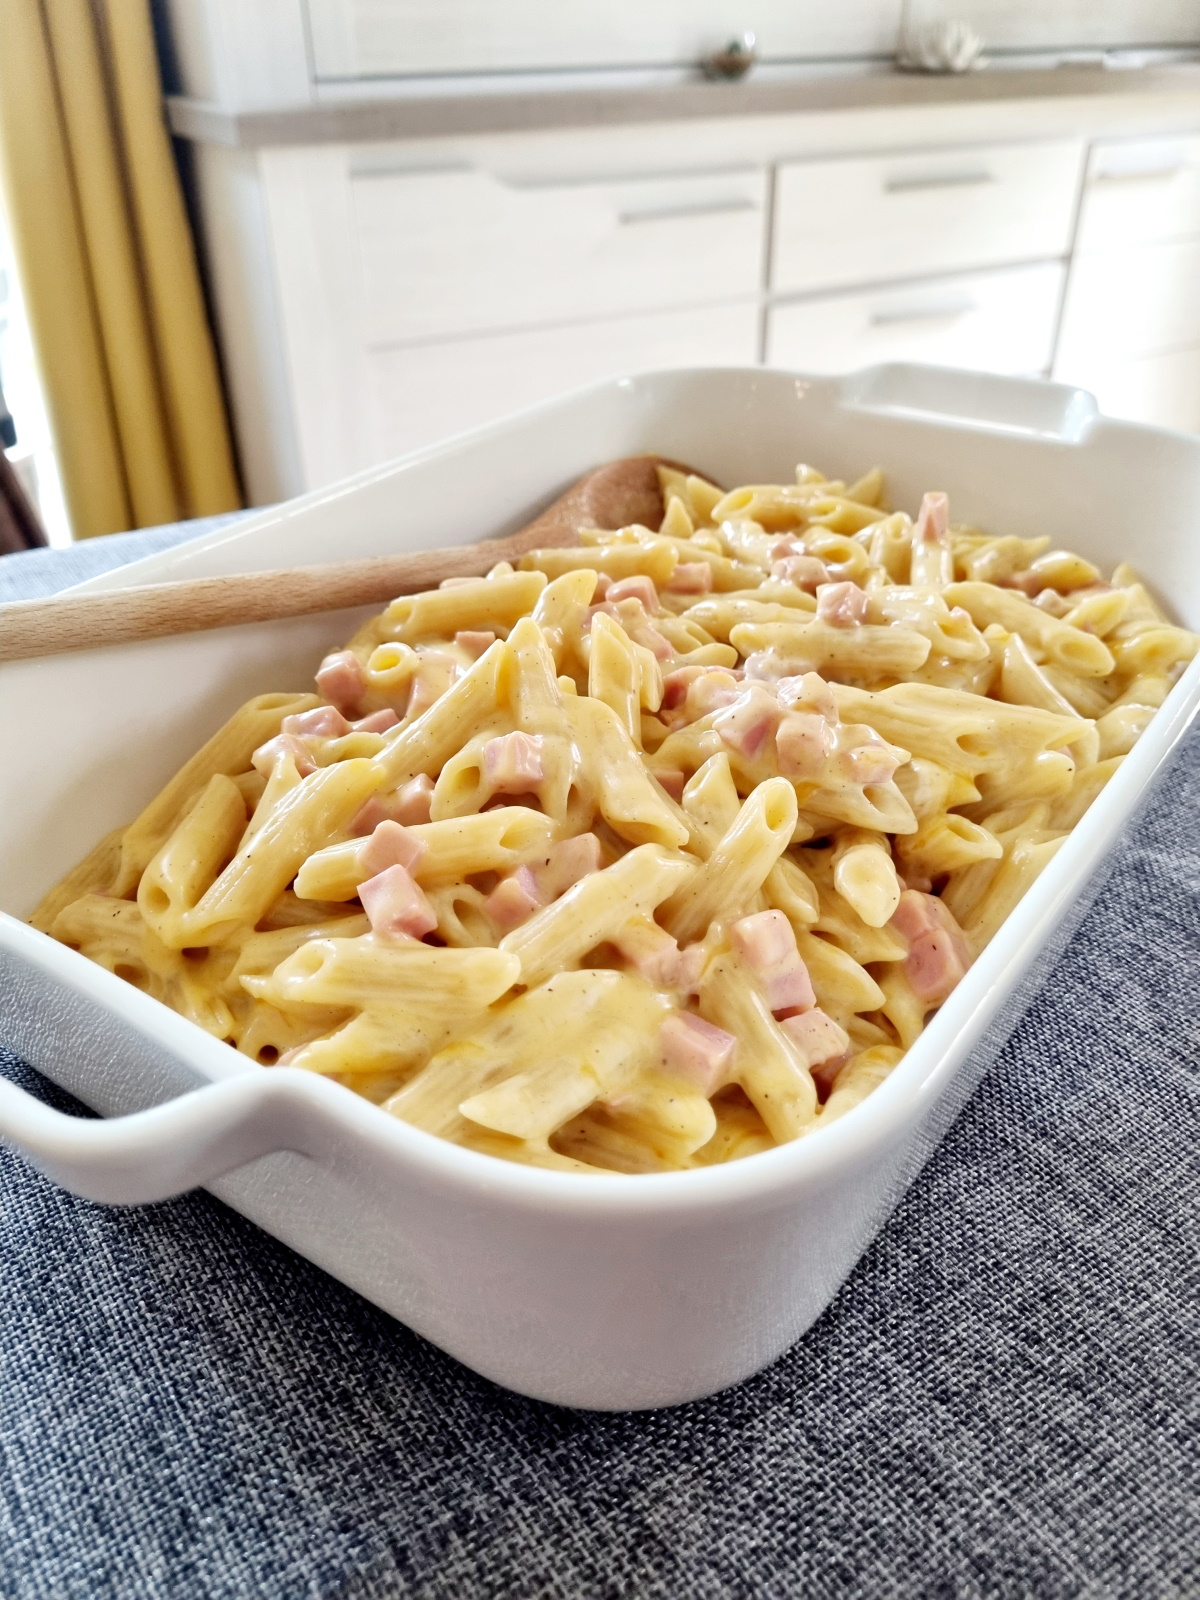 Recette One pot pasta coquillettes cheddar sur Chefclub daily